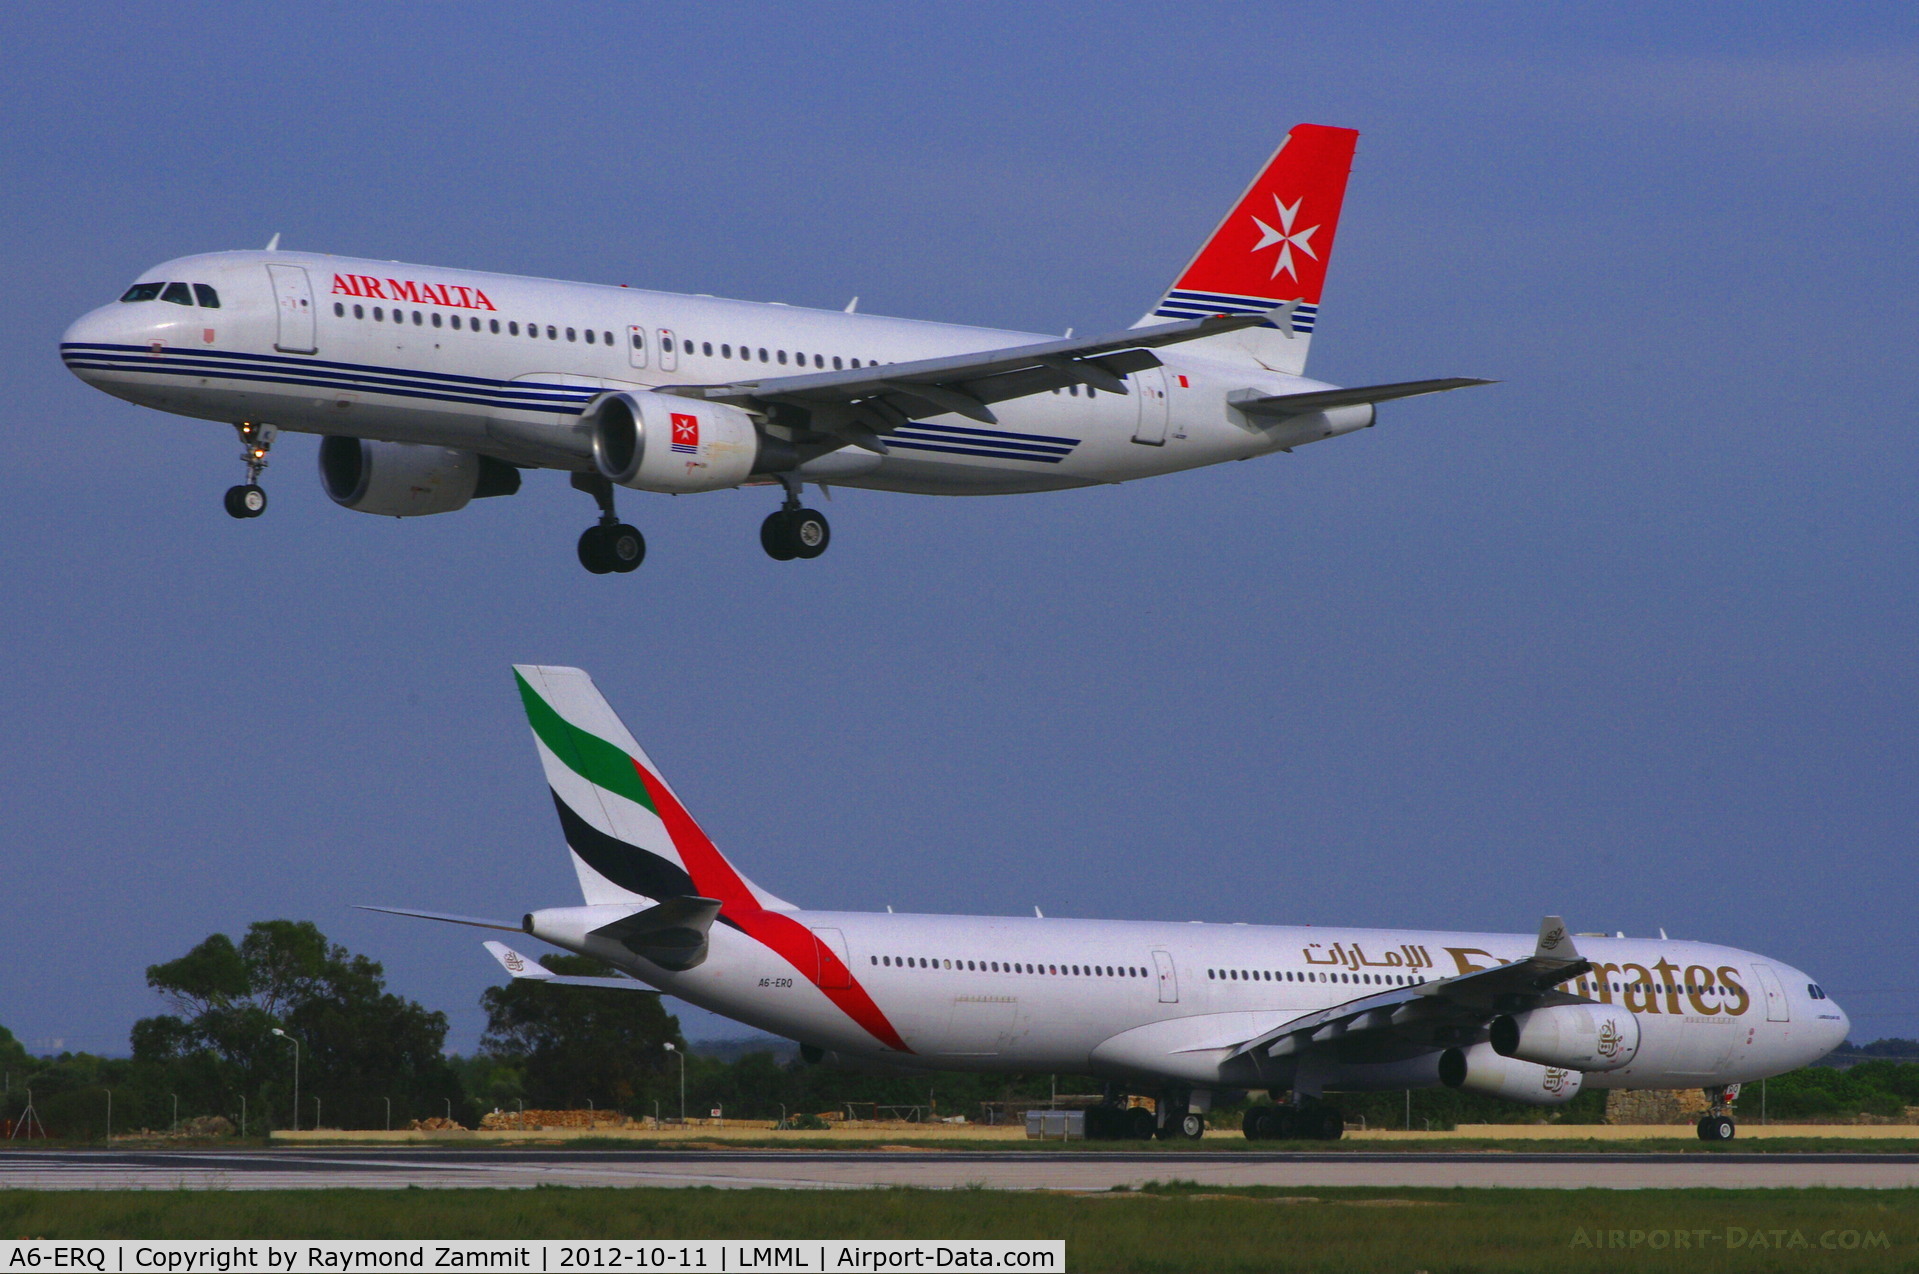 A6-ERQ, 1997 Airbus A340-313X C/N 190, A340 A6-ERQ of Emirates Airlines waiting to line up RW31 behind the landing Airmalta A320 9H-AEK.